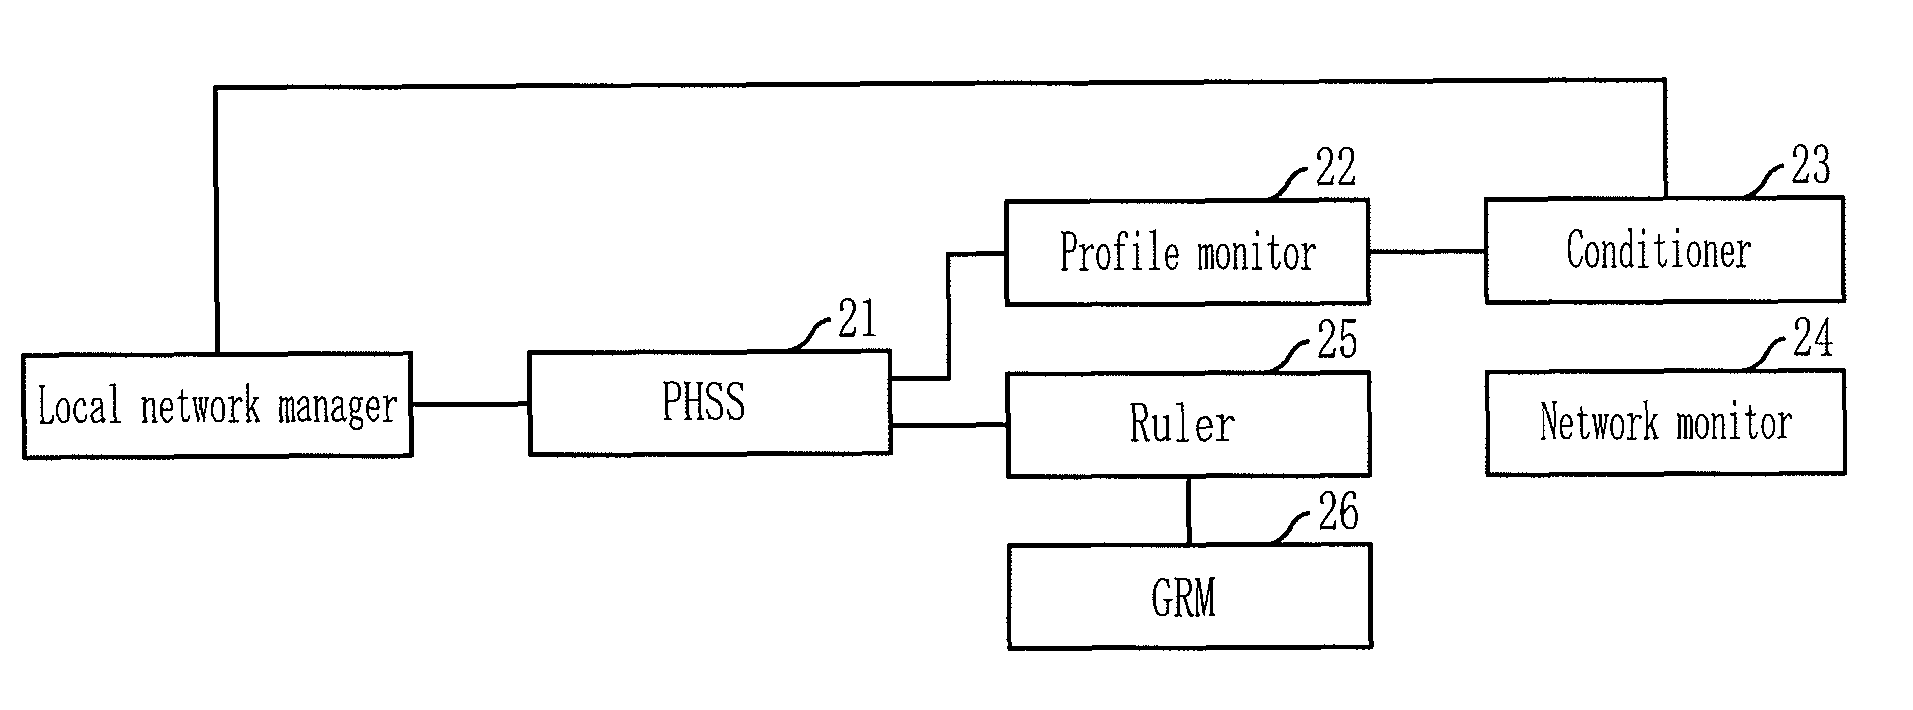 Apparatus and method for managing quality of service in integrated network of heterogeneous mobile network